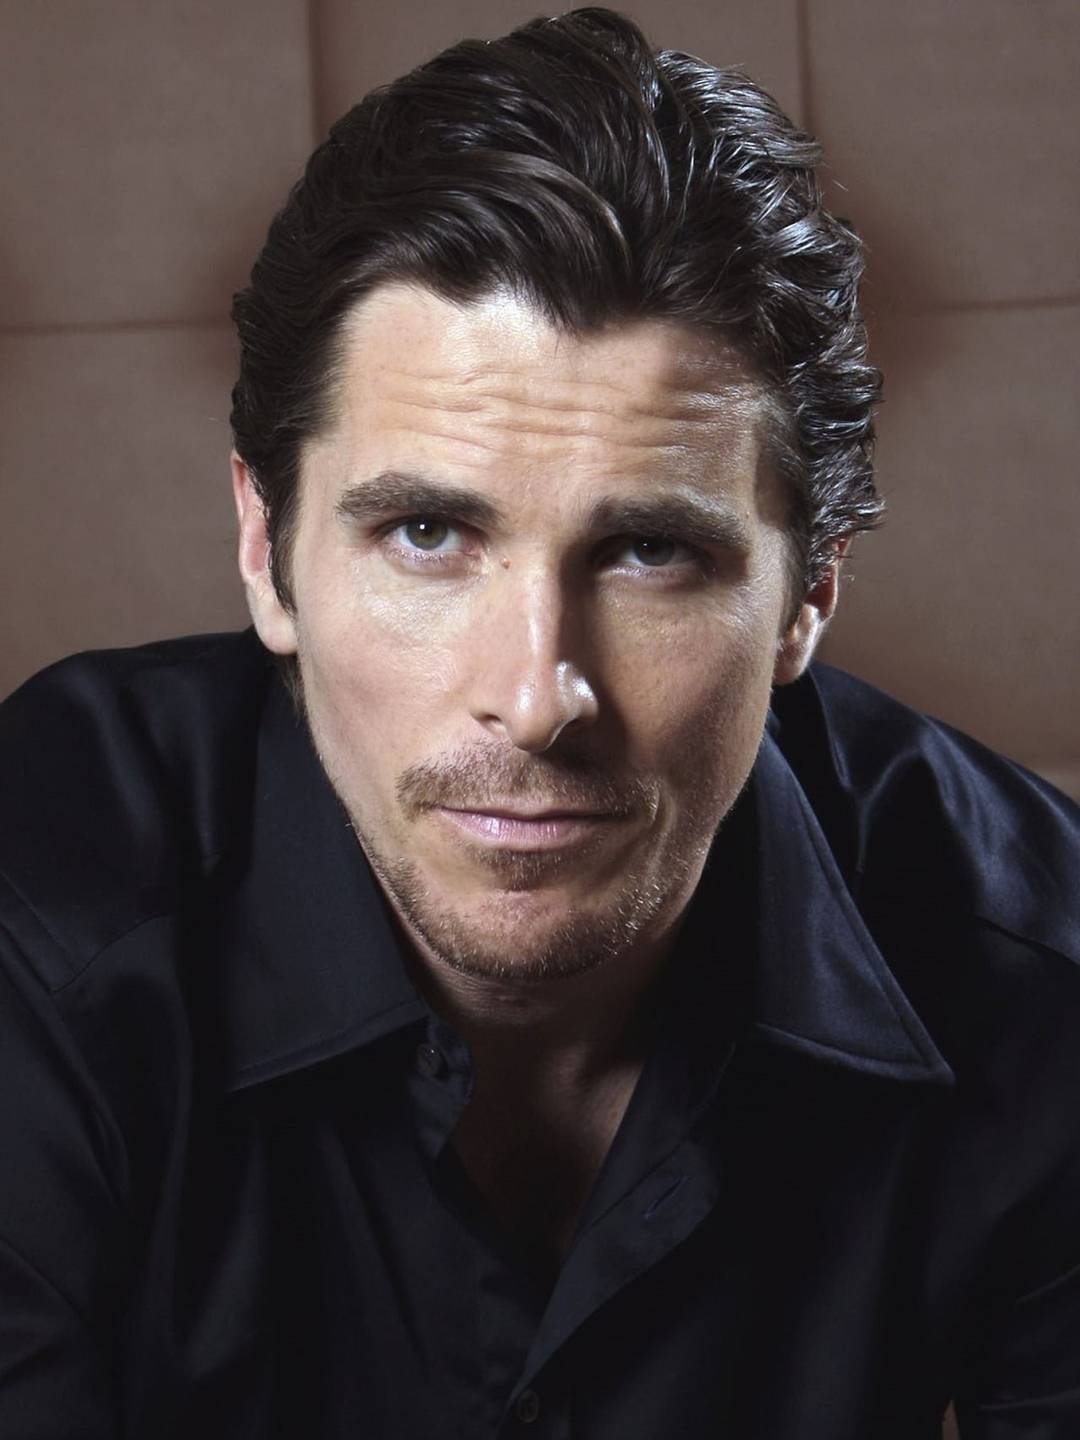 Christian Bale story of success